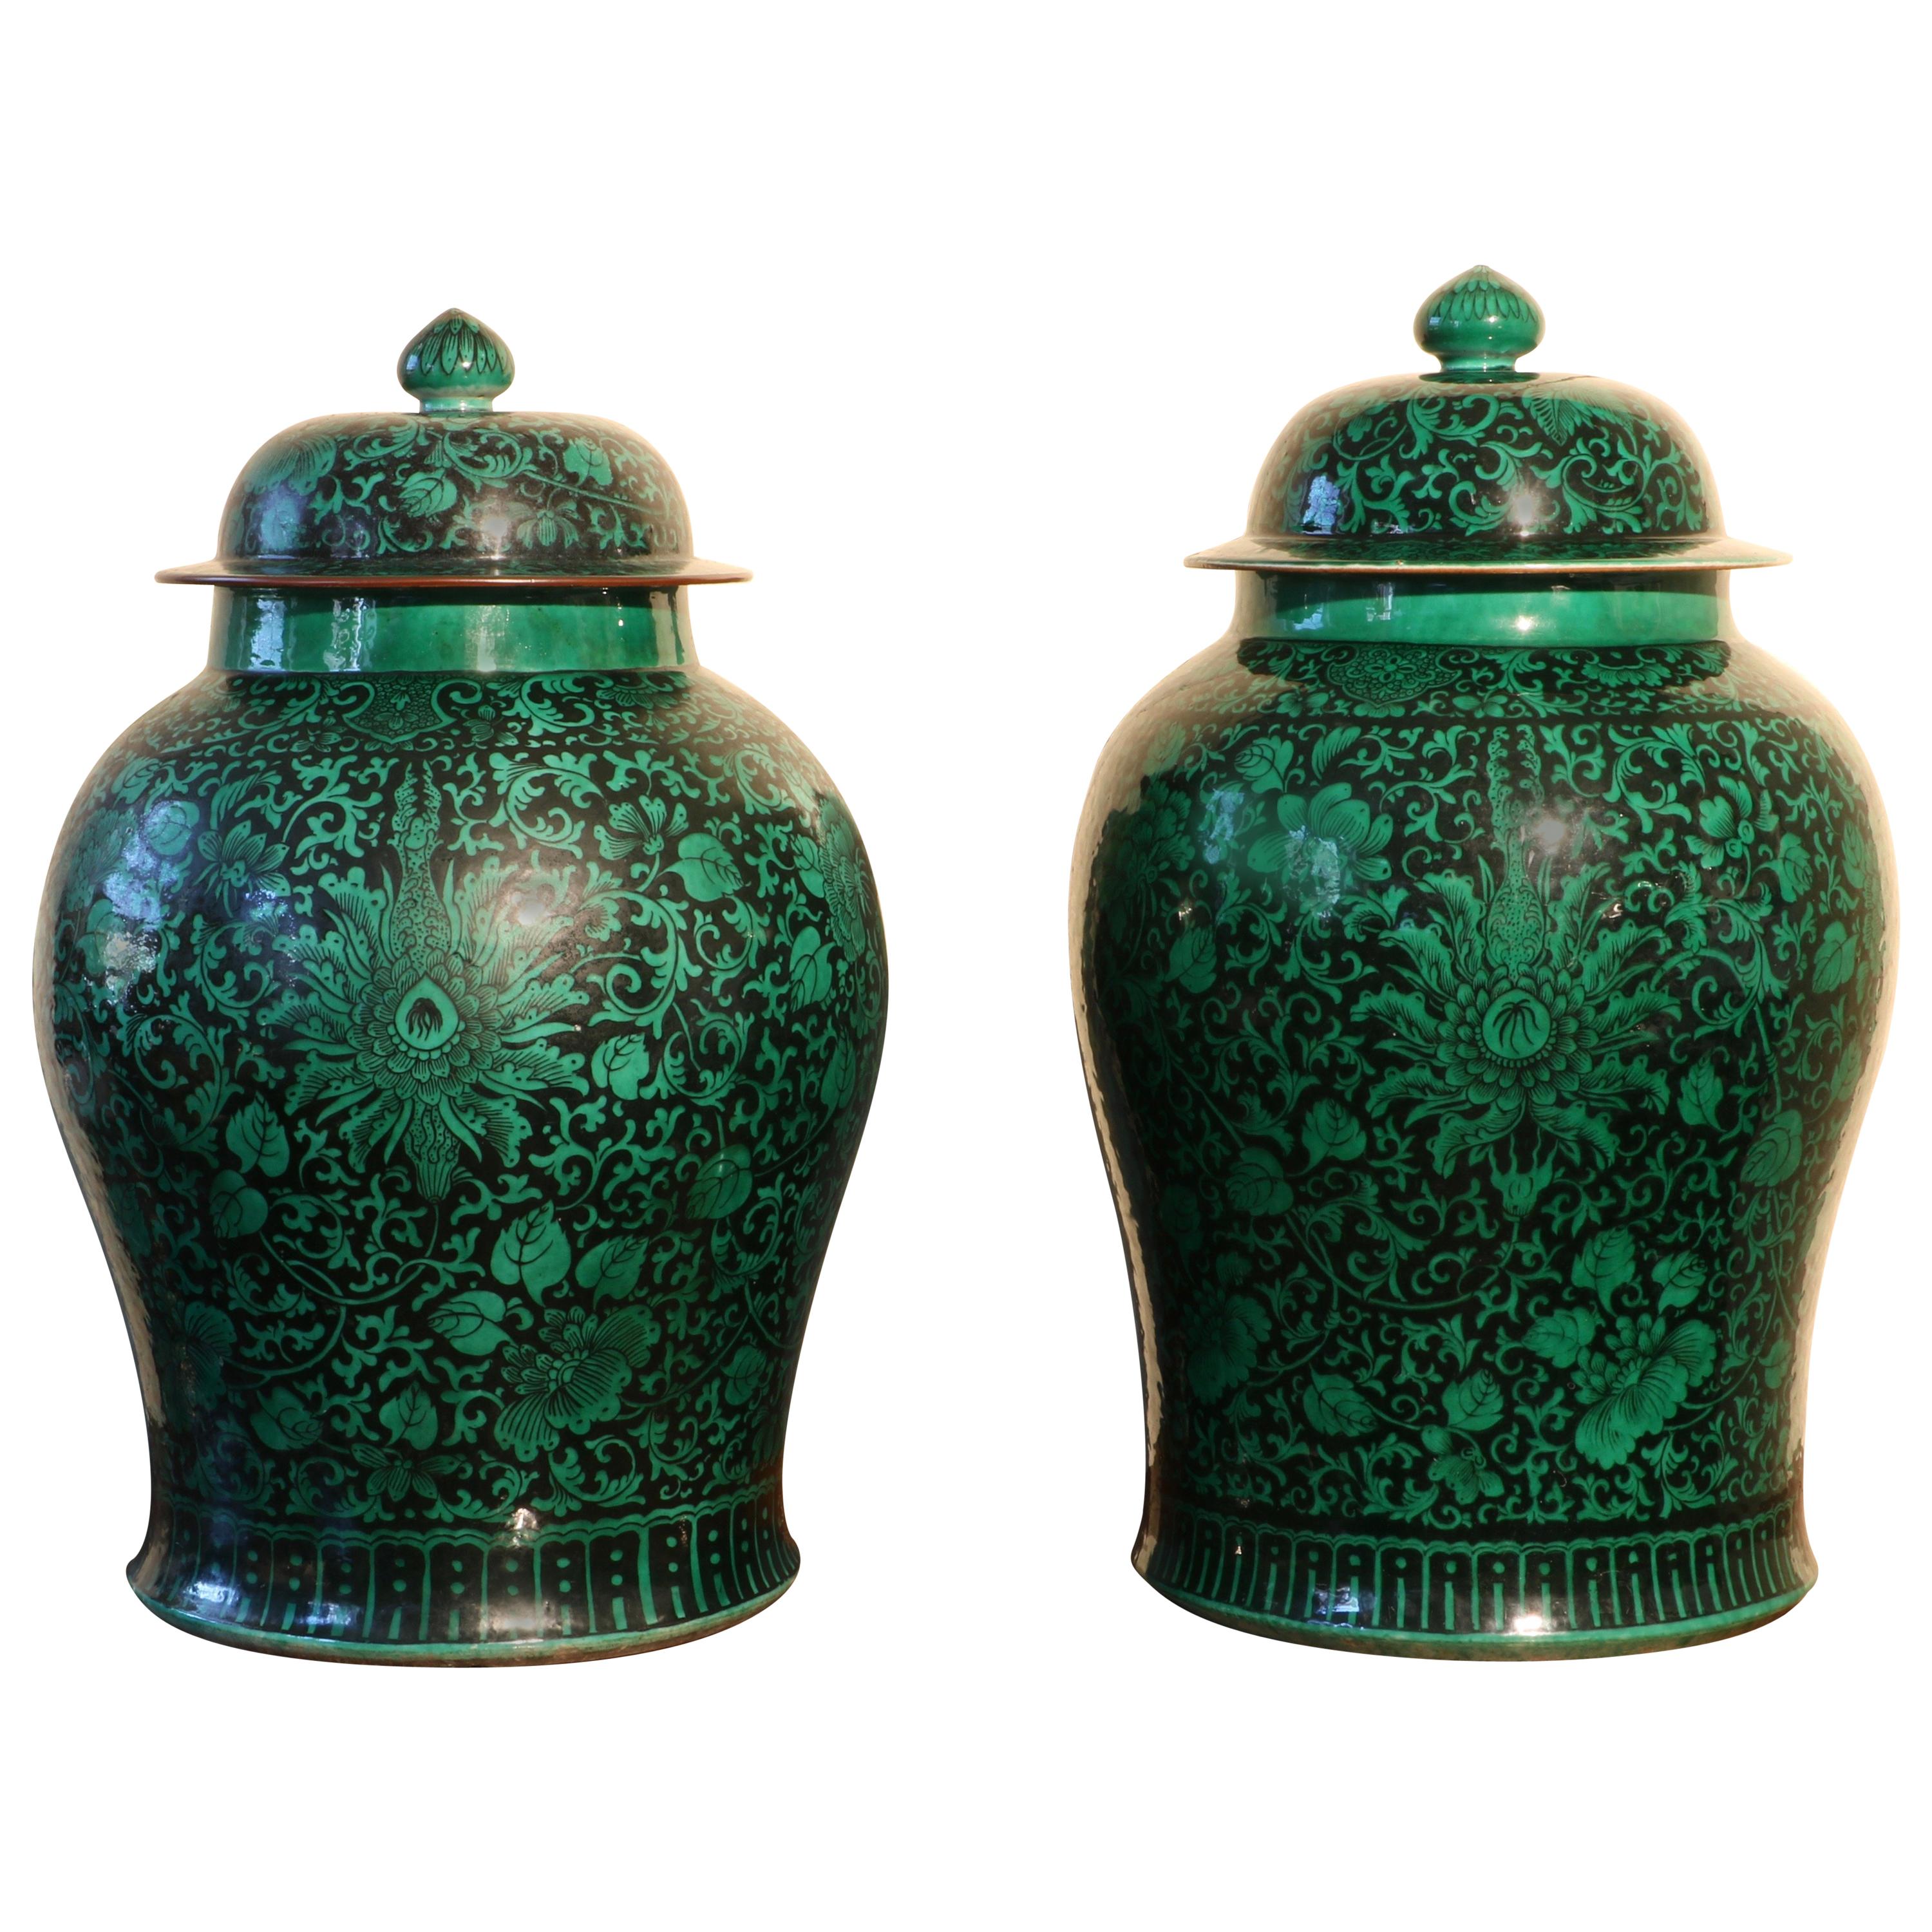 Pair of Large Famille Noire Baluster Vases and Covers, 18th-19th Century For Sale